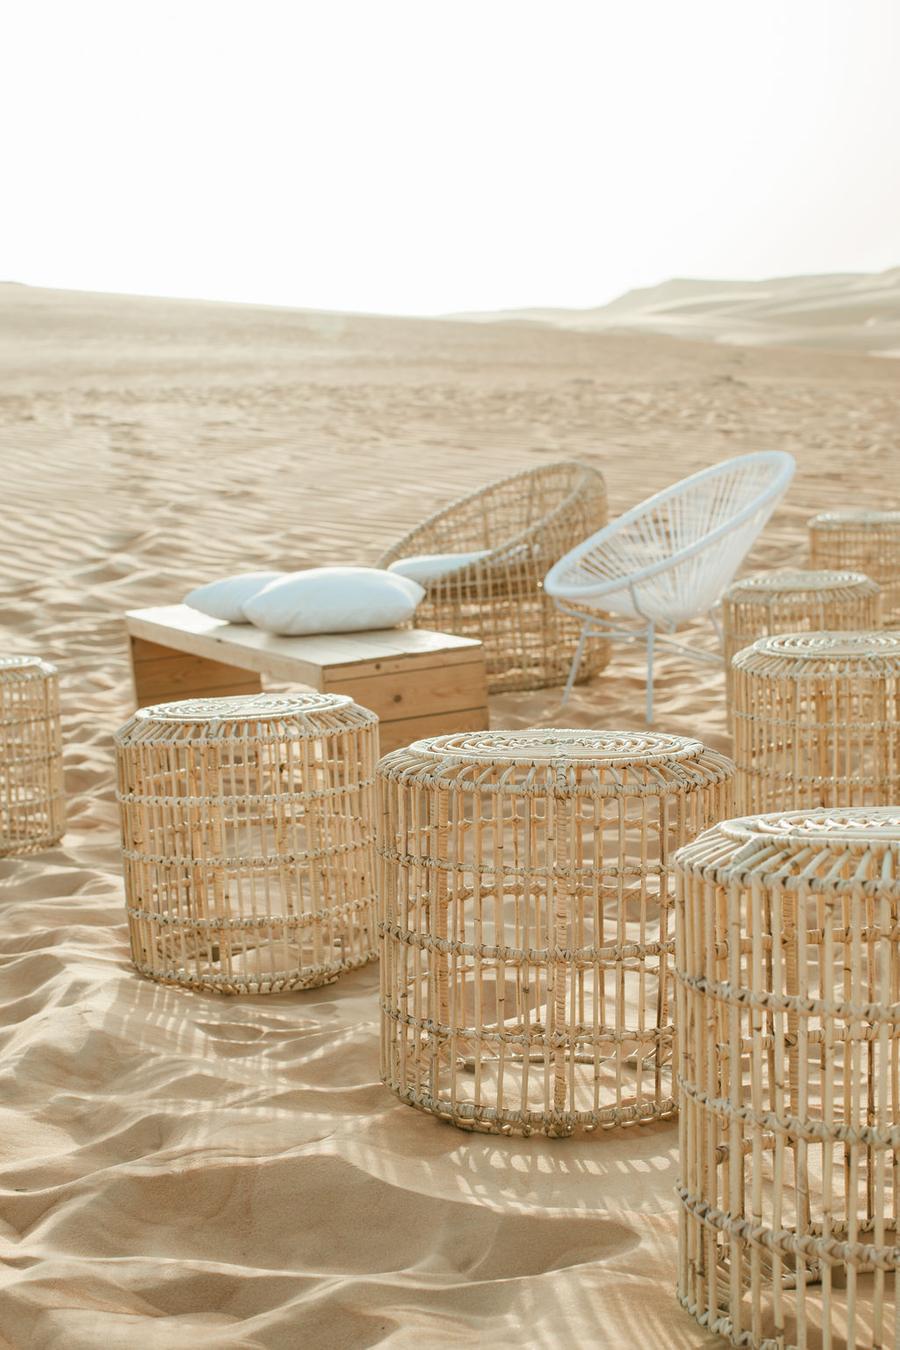 There was a wedding lounge set with rattan furnoture right in the desert